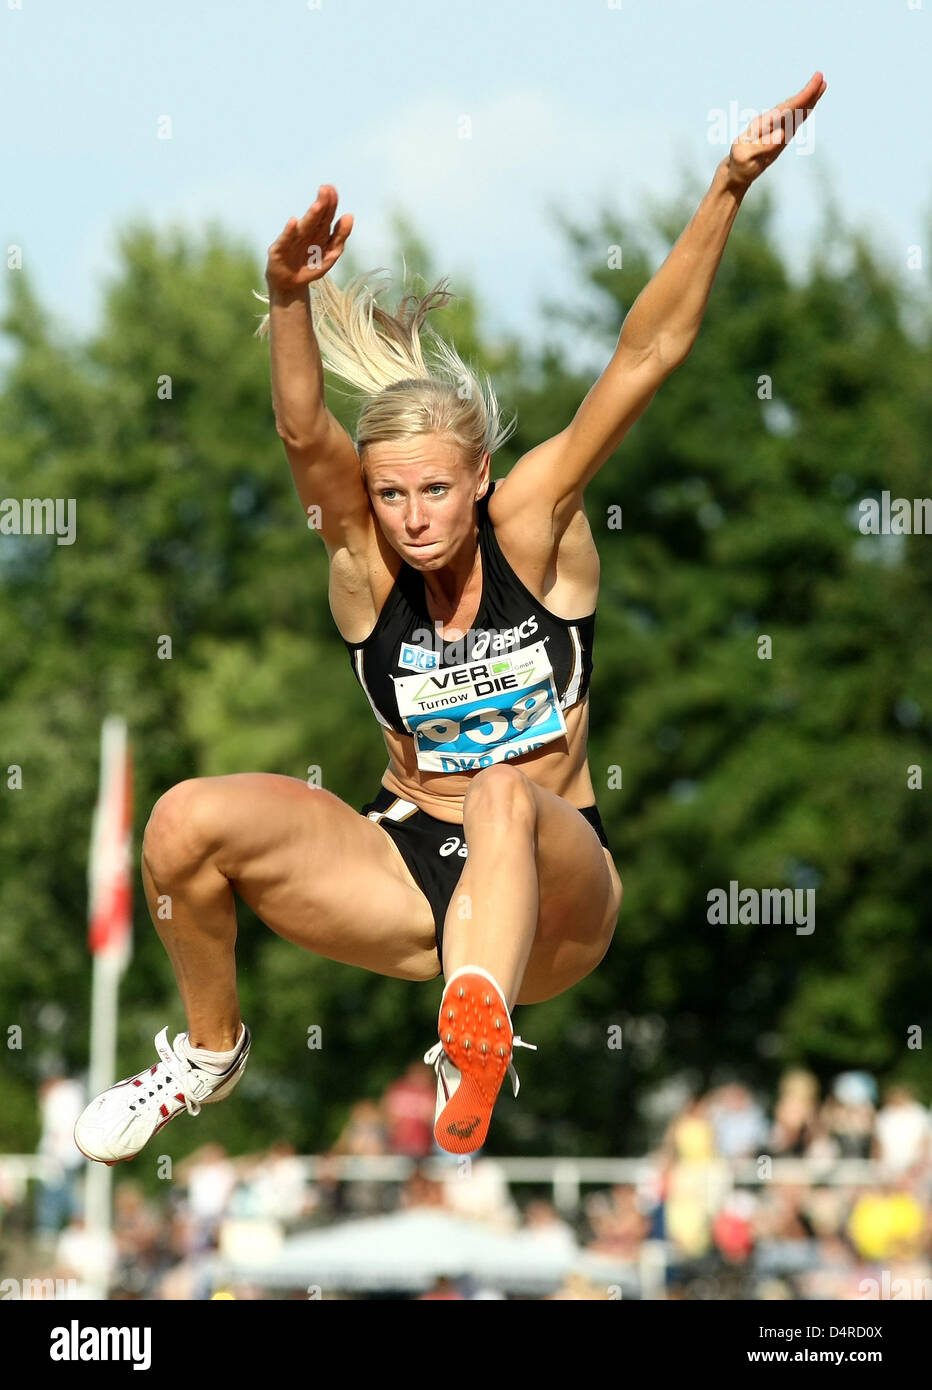 German long jumper Bianca Kappler of LC asics Rehlingen seen in action at  the 20th International Athletics Meeting in Cottbus, Germany, 08 August  2009. Many athletes consider the meeting a final test